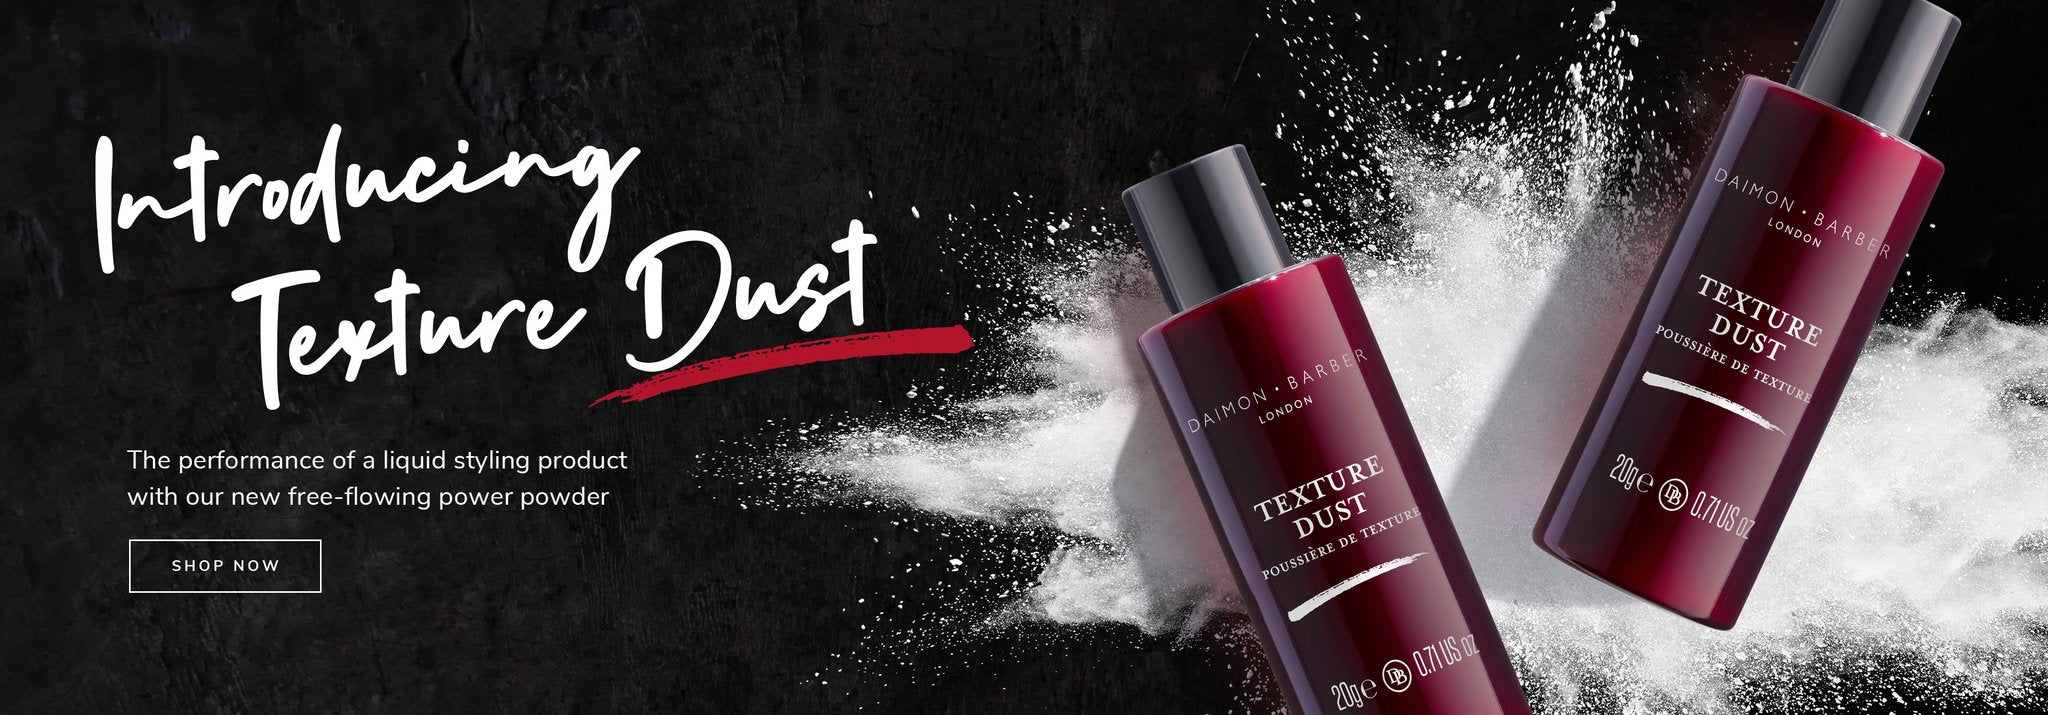 Introducing Texture Dust